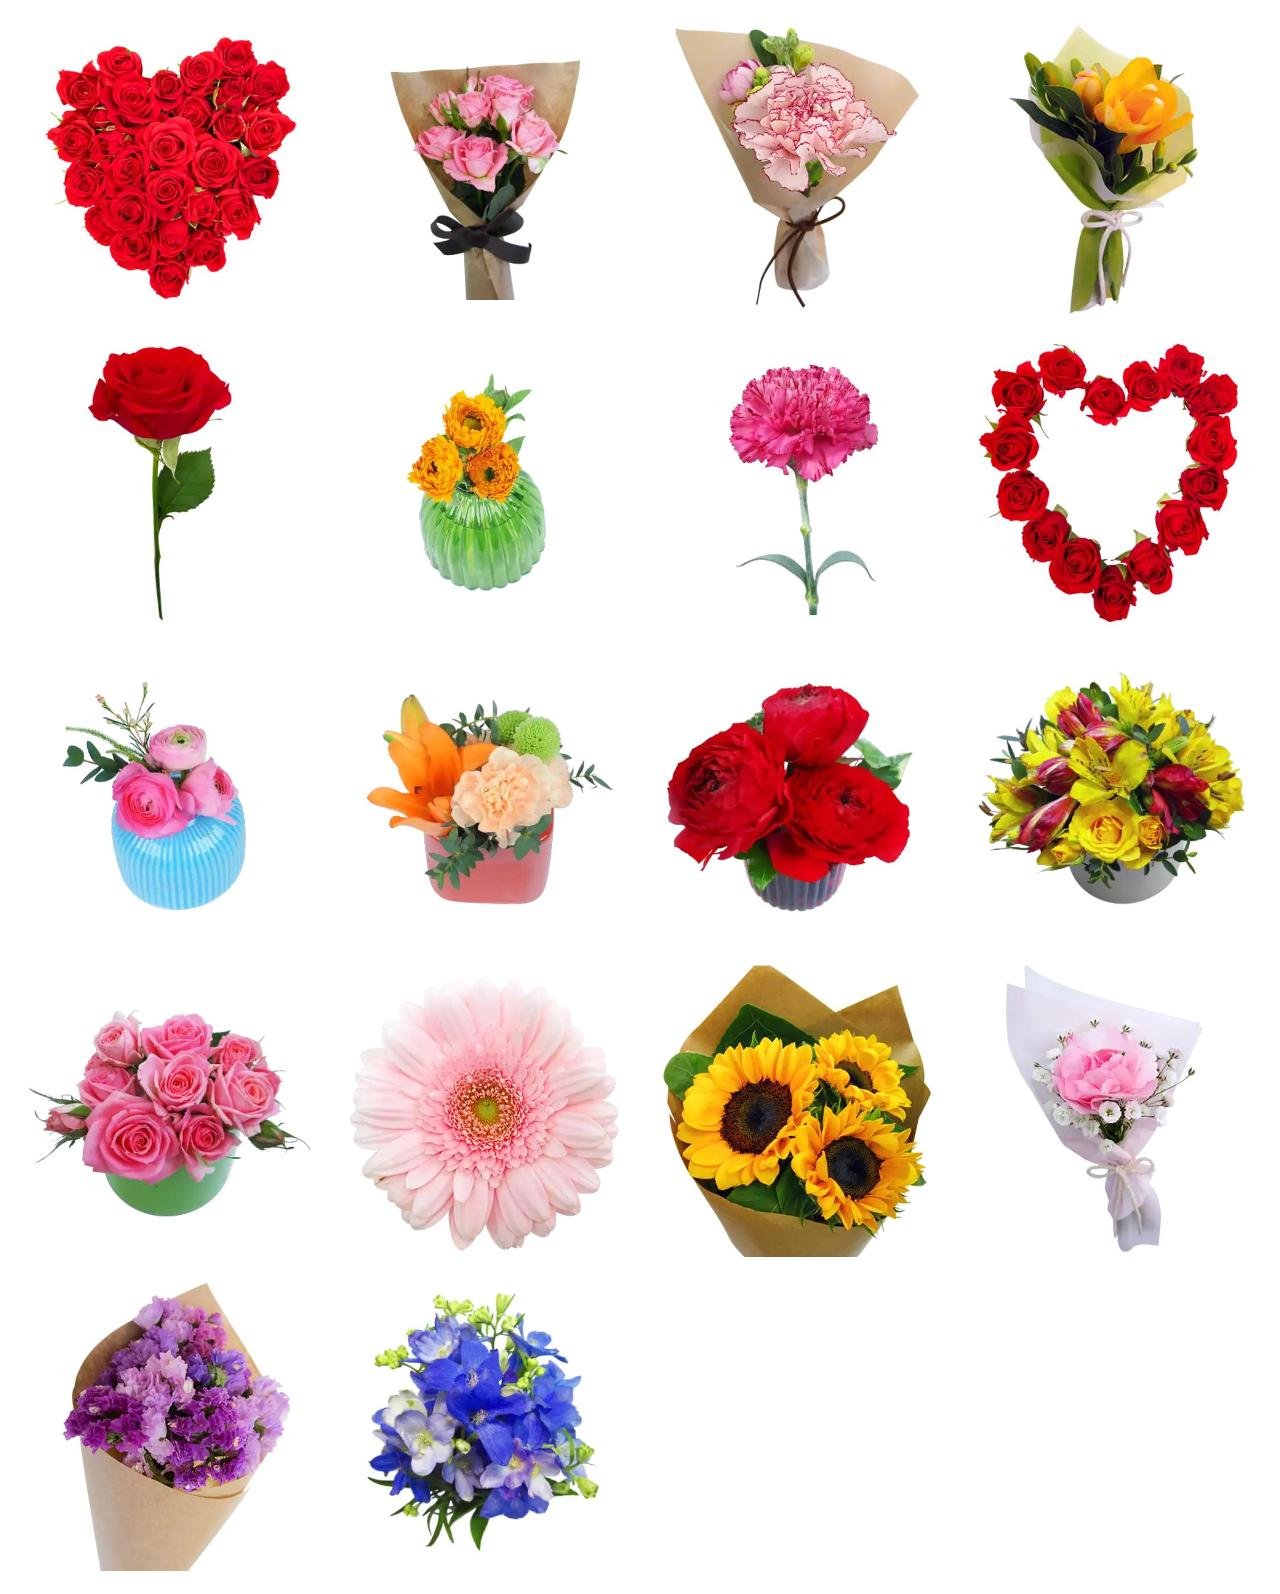 Real Flowers For Love Romance,Etc. sticker pack for Whatsapp, Telegram, Signal, and others chatting and message apps